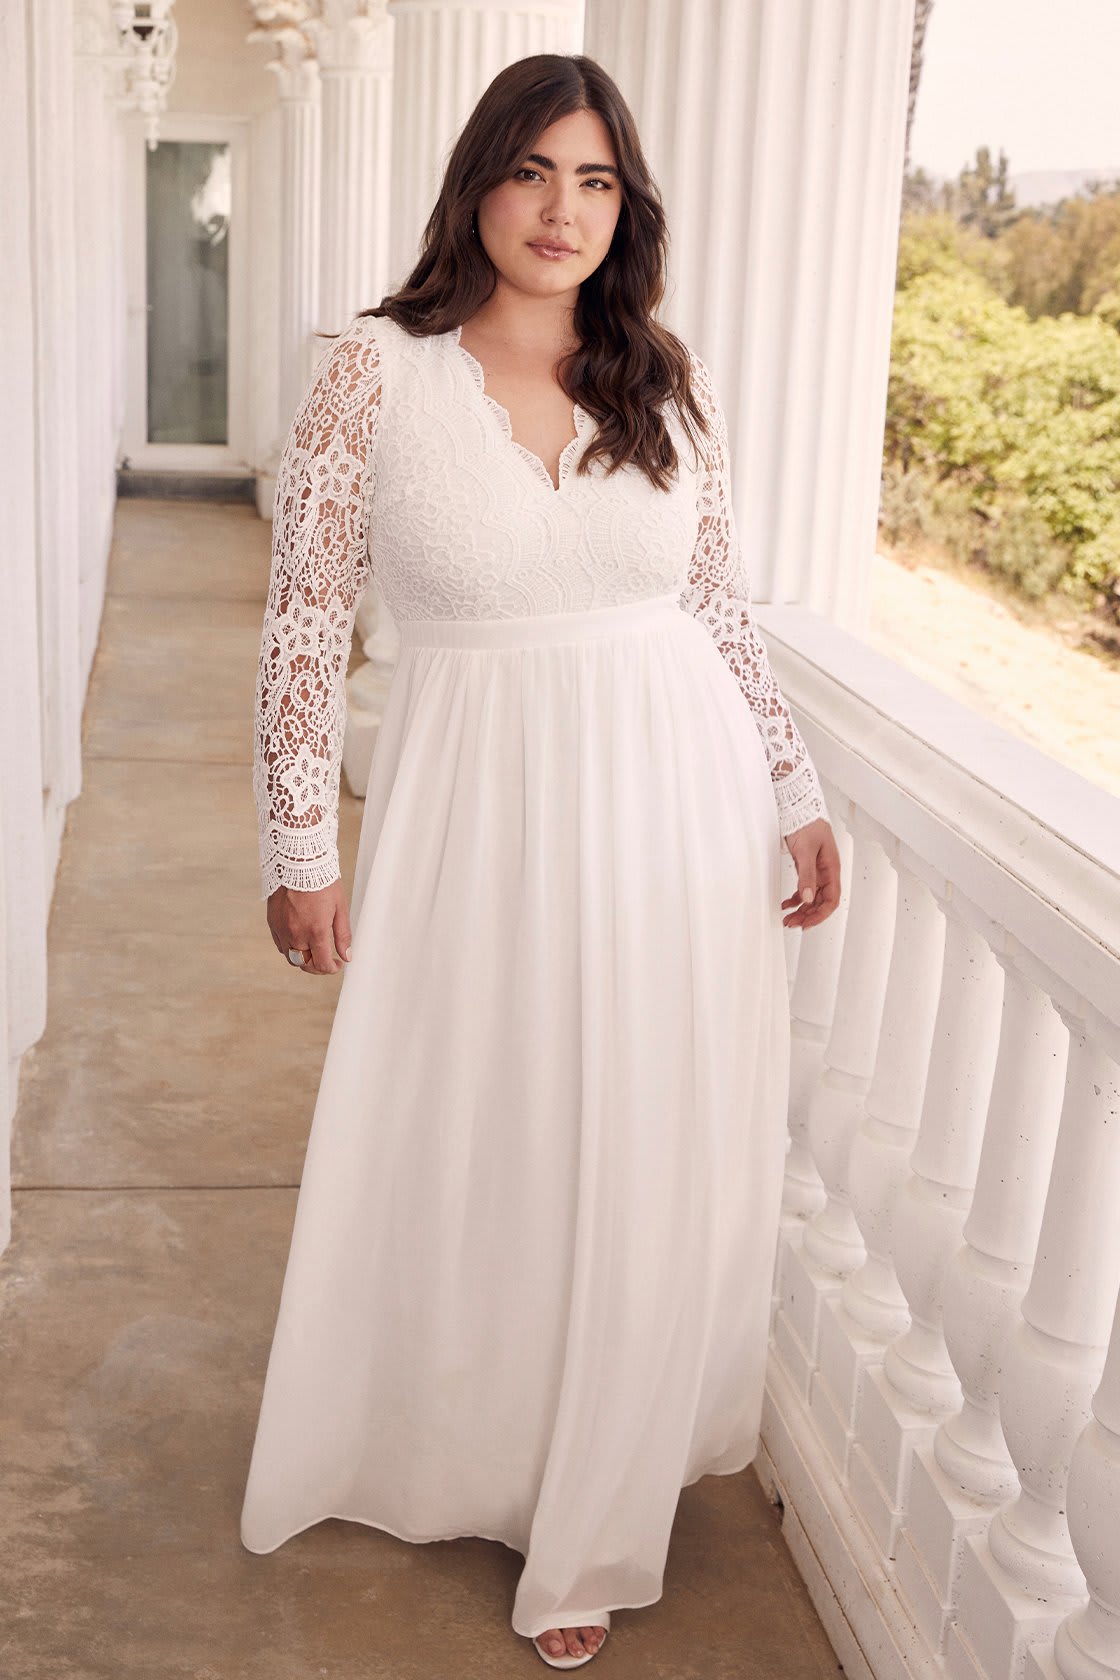 Stunning Long Sleeve Wedding Dresses For Every Type Of Bride